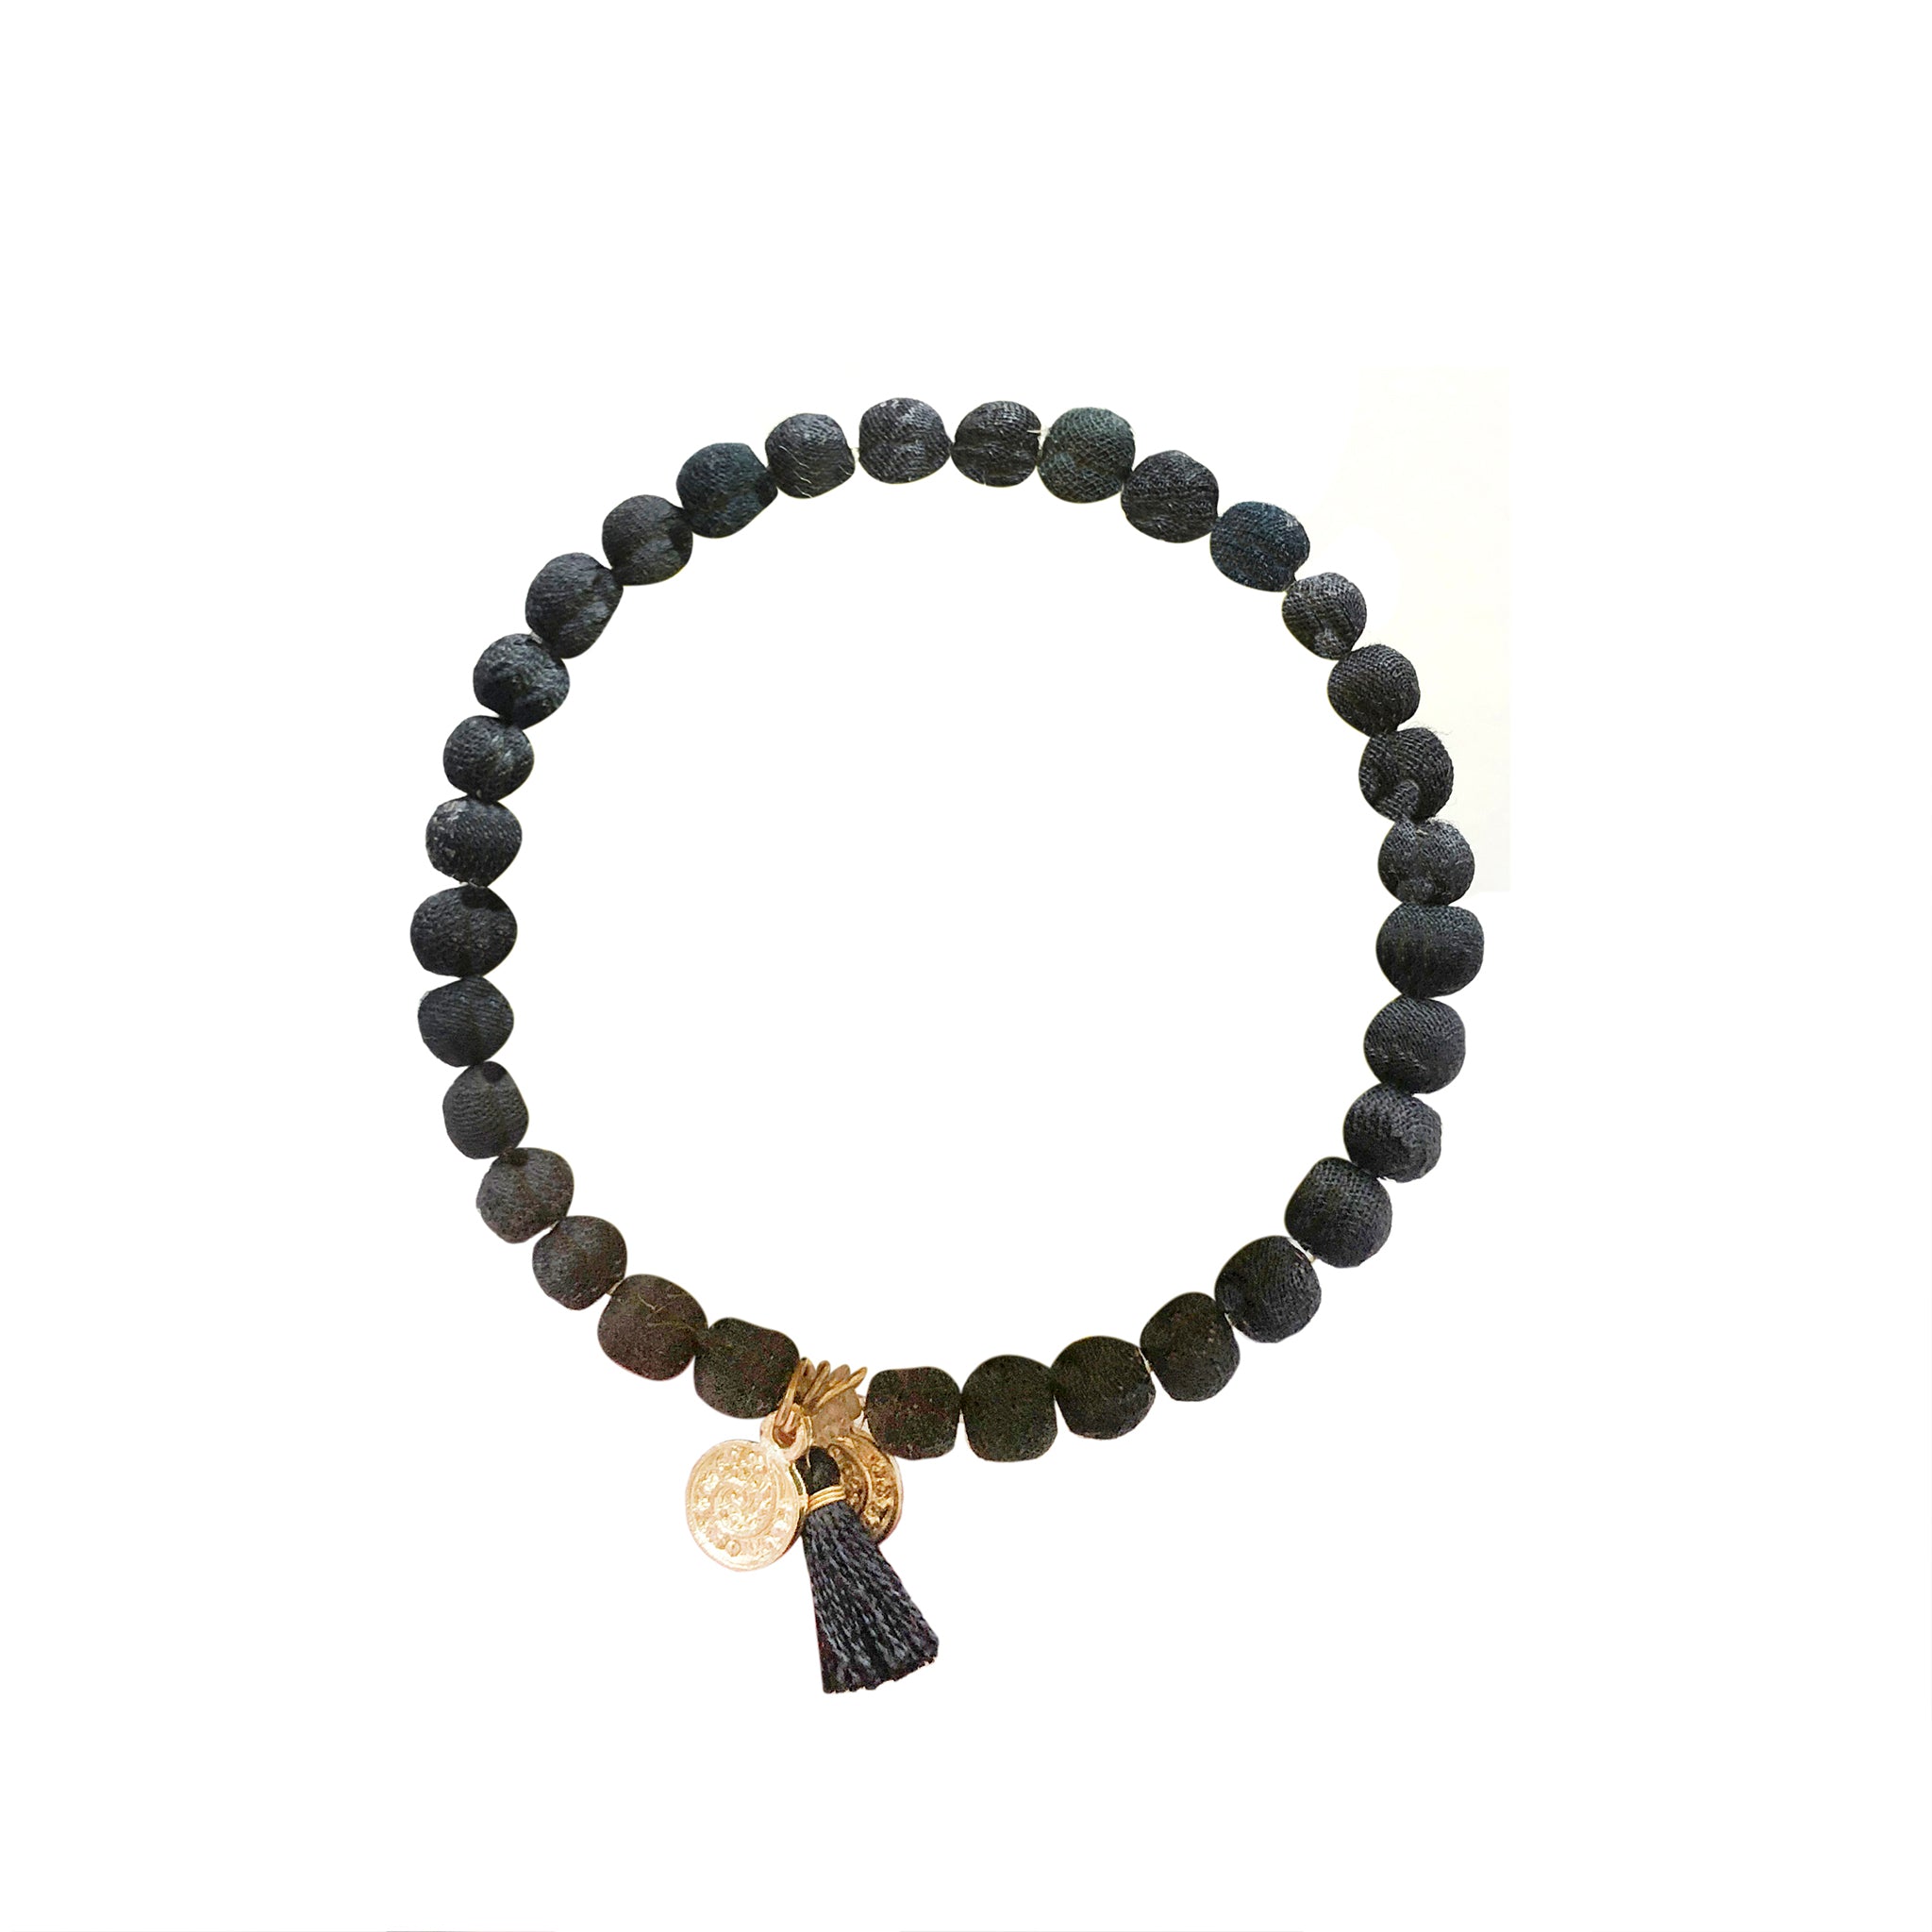 A black beaded bracelet is accented with a black tassel and two charms